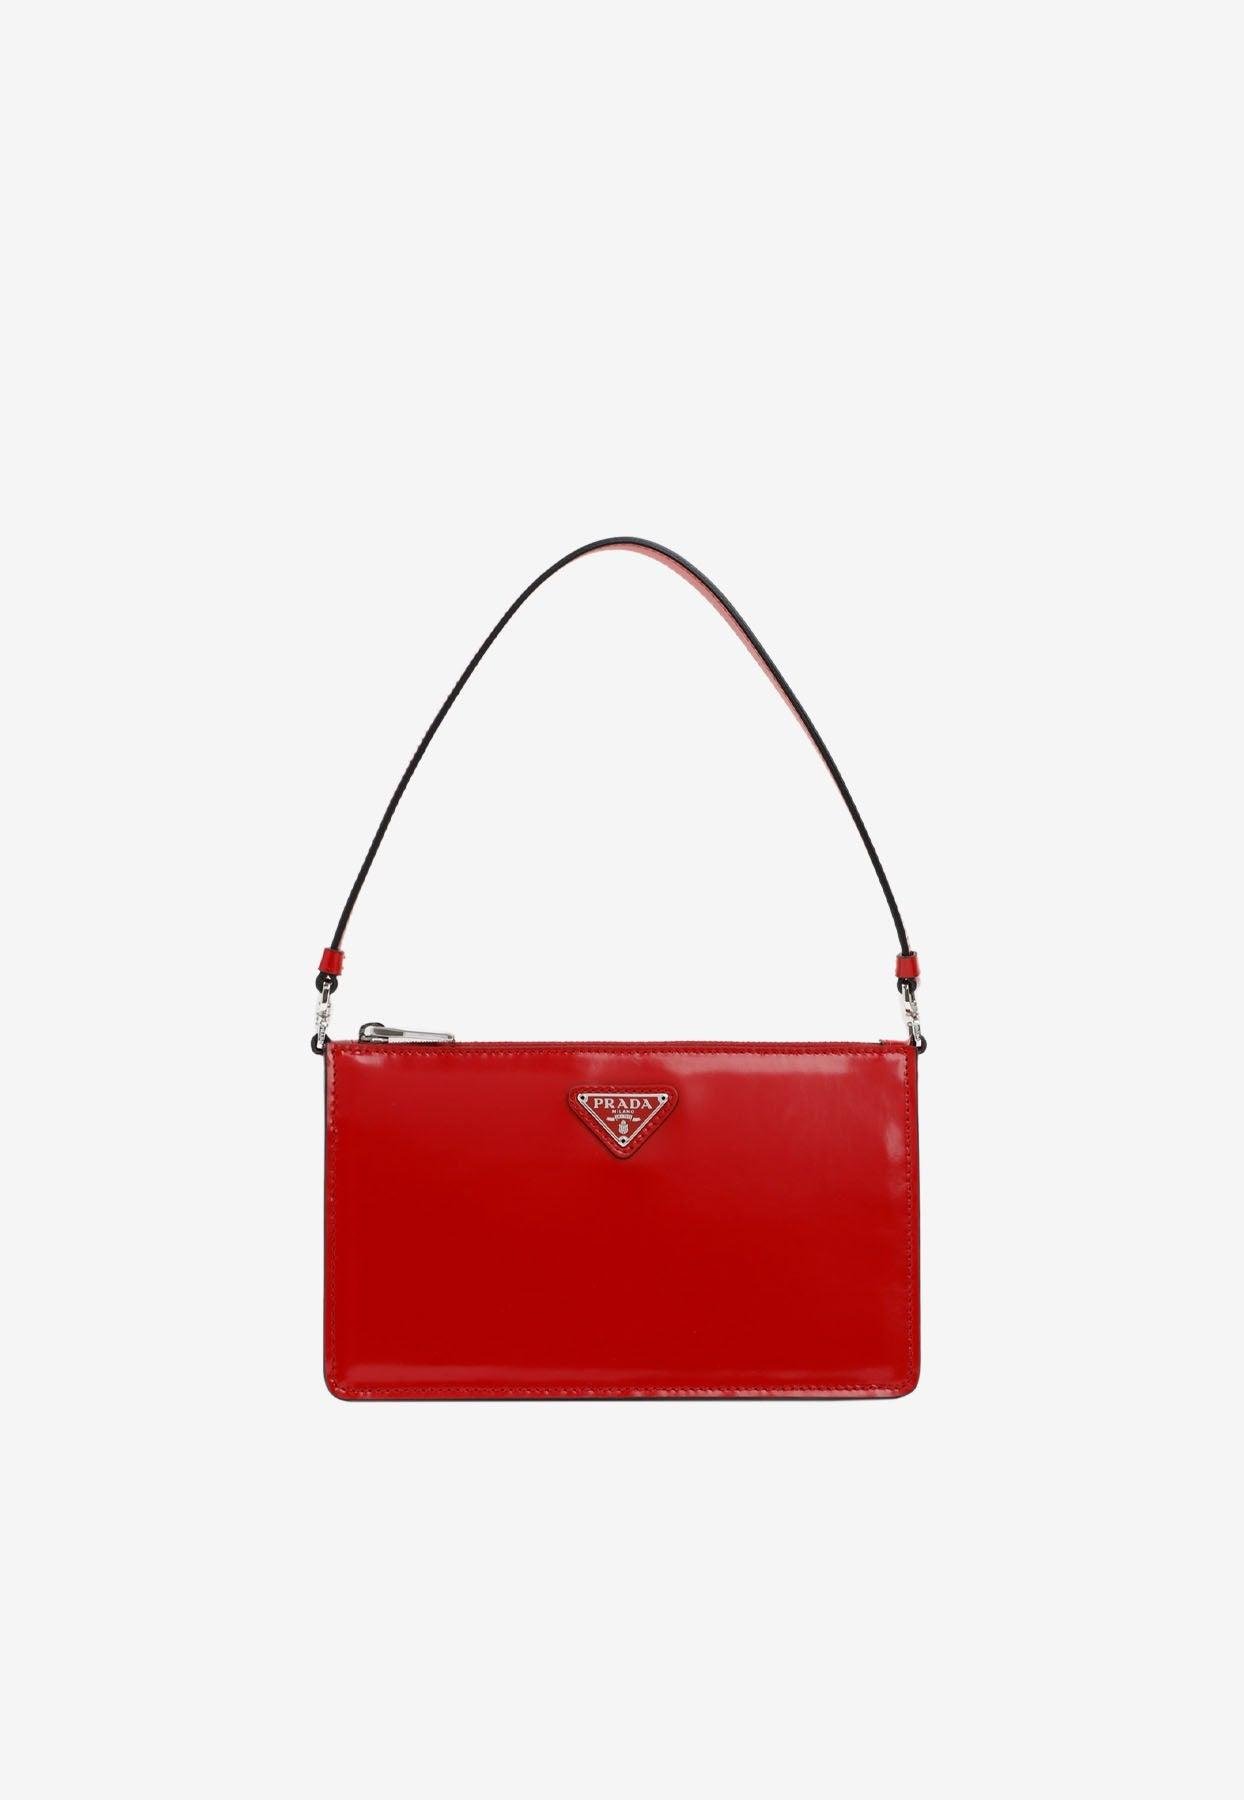 Ladies Red Leather Tote Bag - The Ben Silver Collection